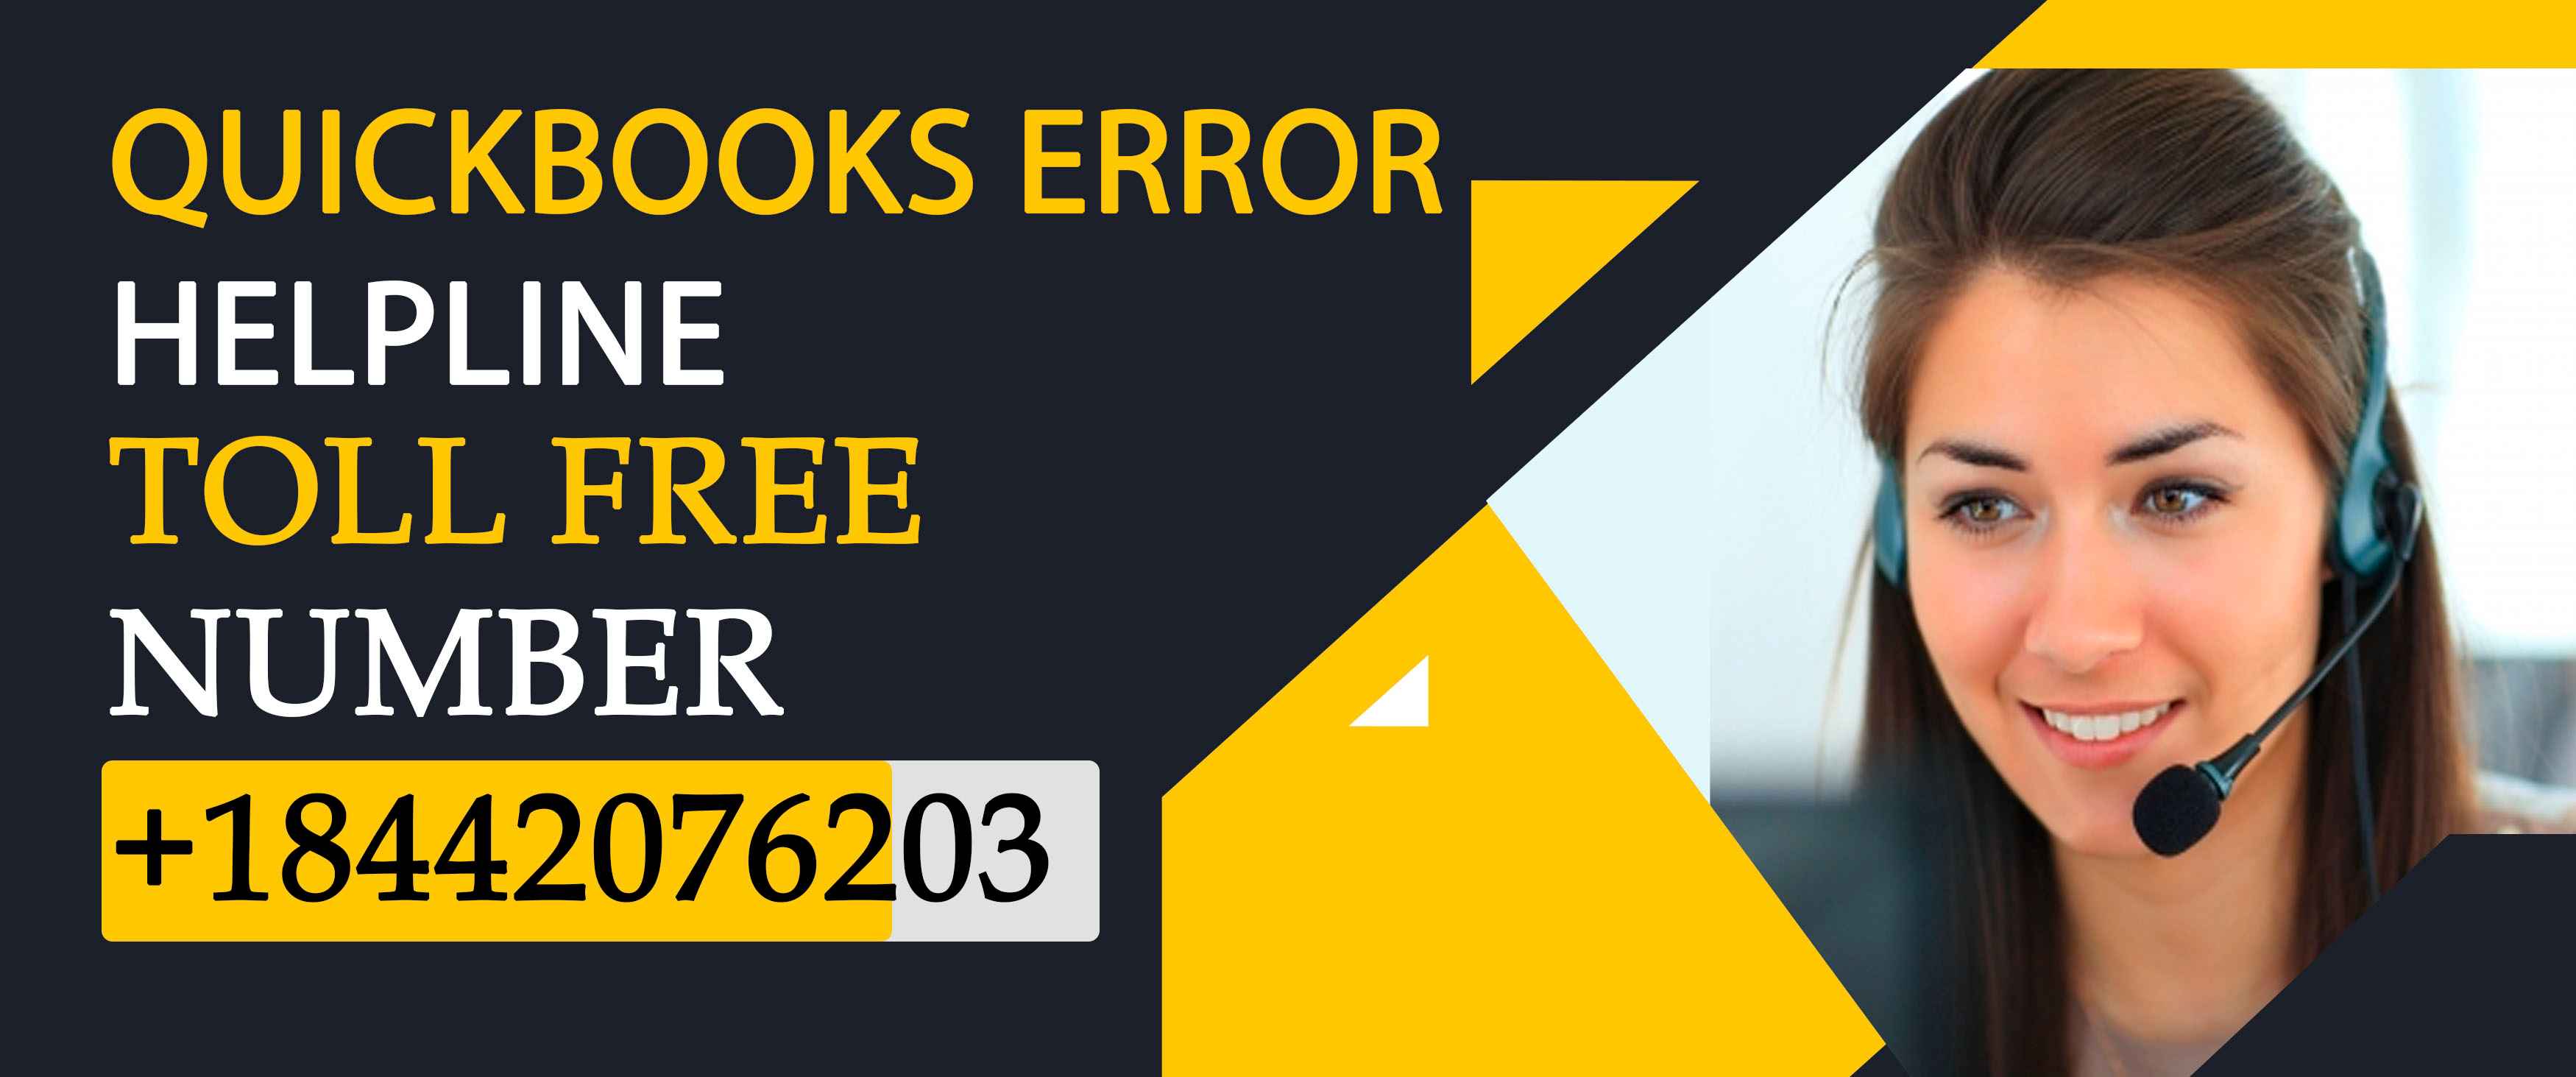 Get In touch with QuickBooks Error Support team